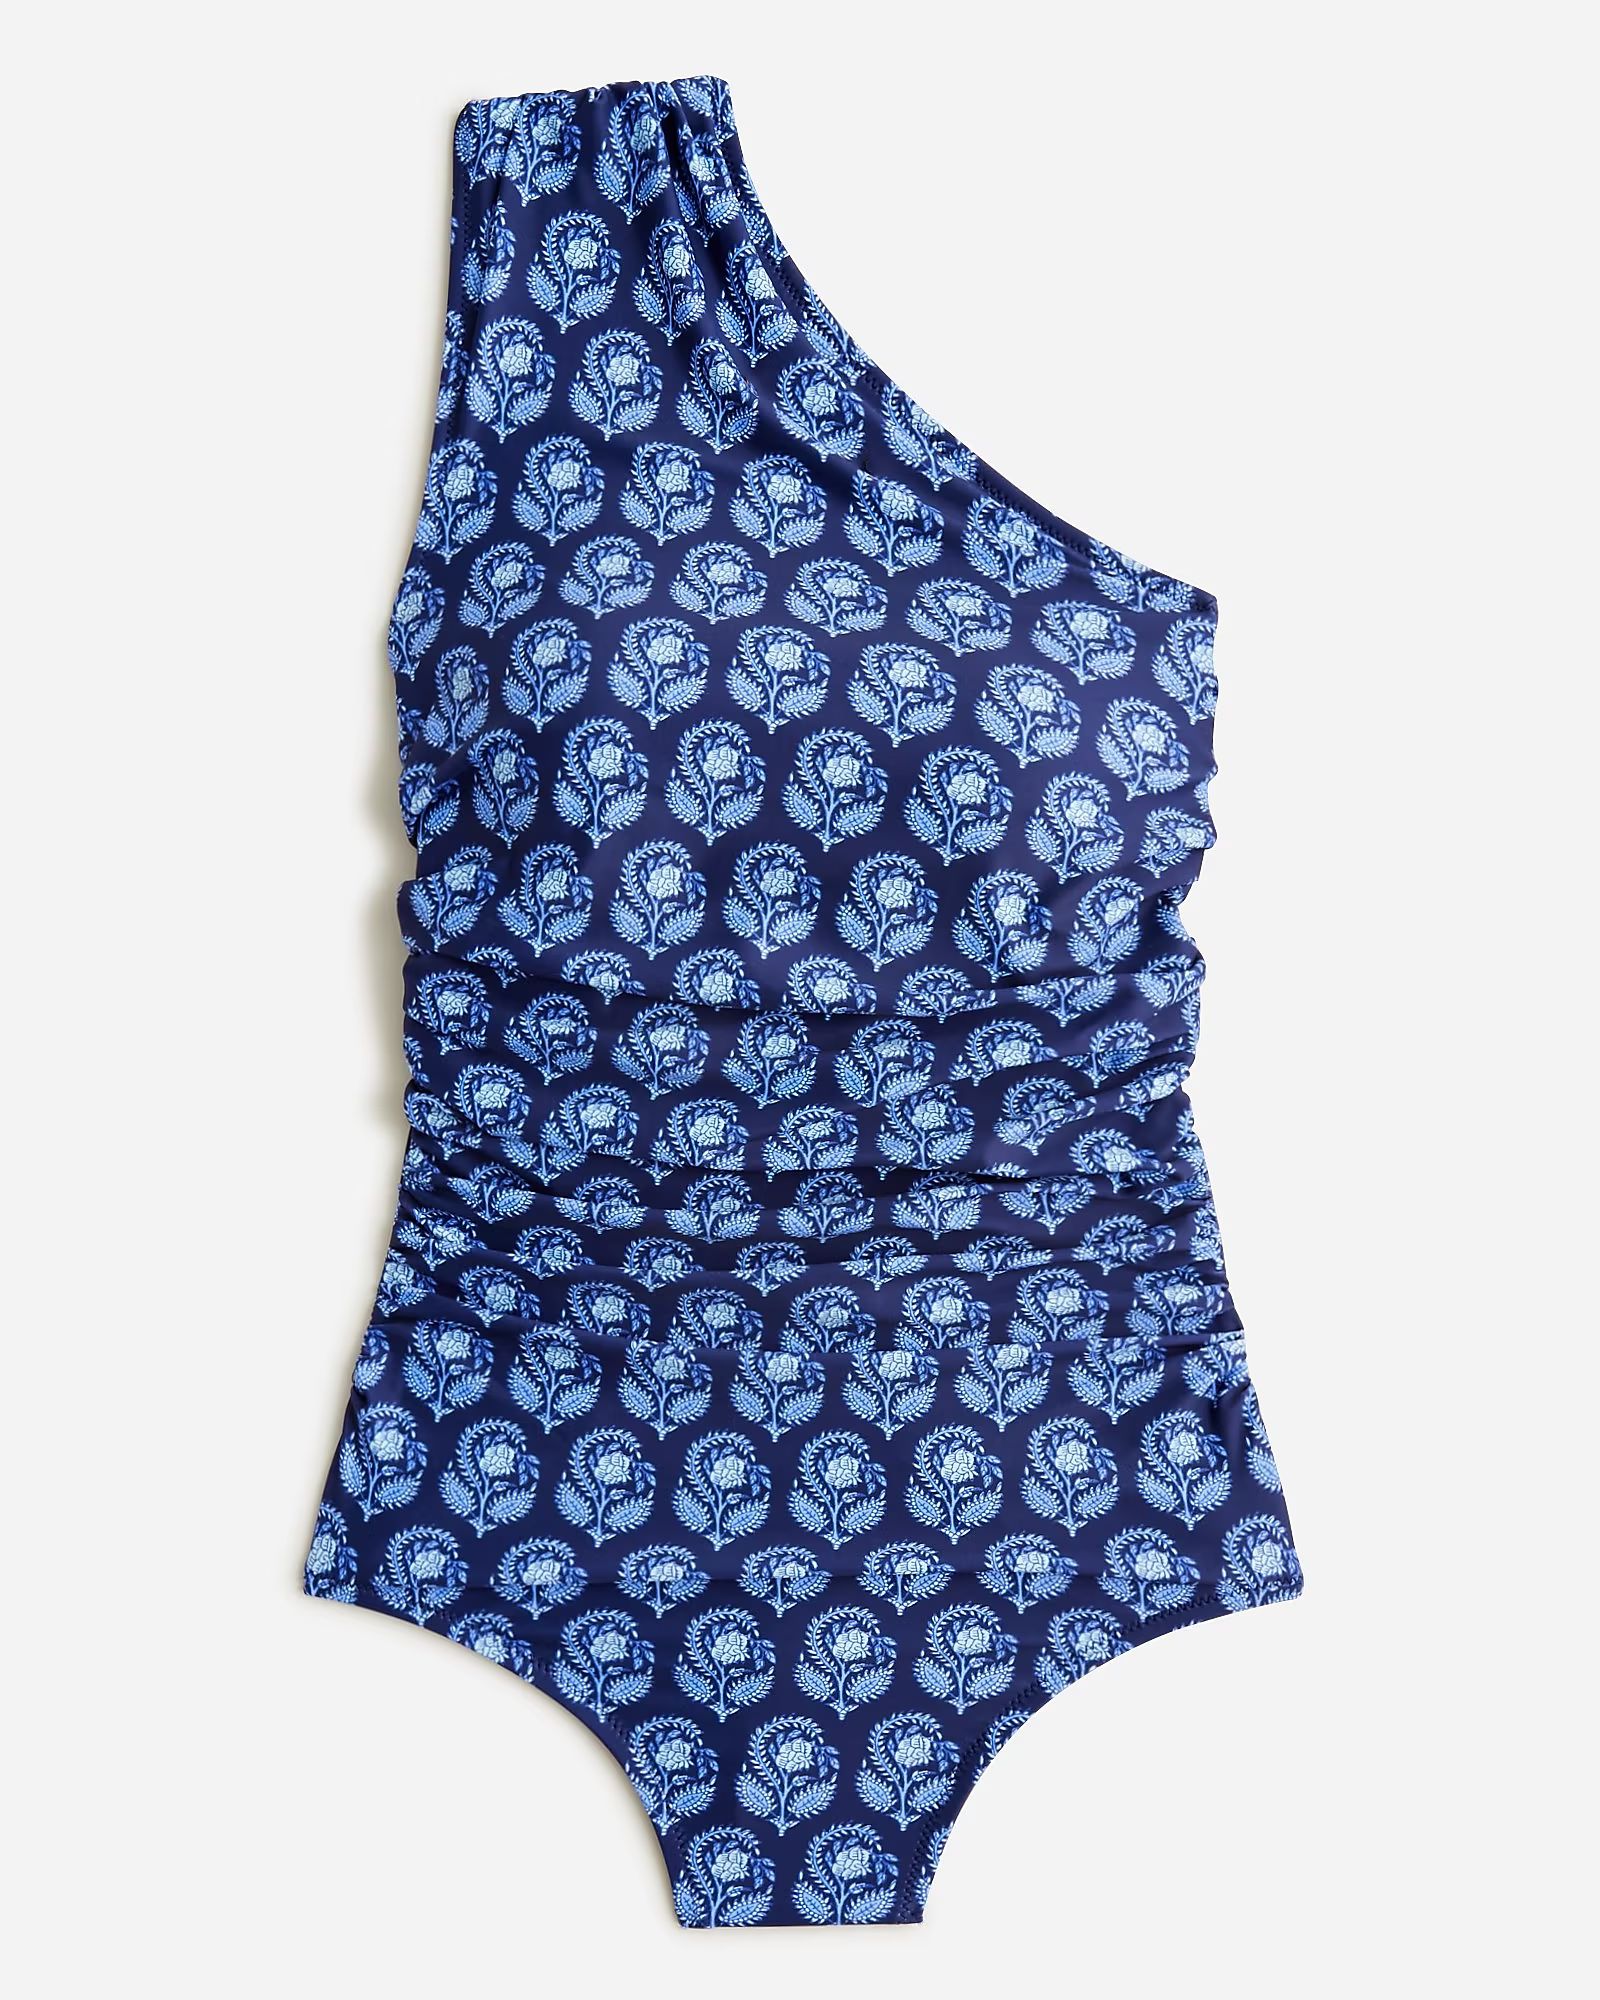 Ruched one-shoulder one-piece swimsuit in navy bouquet block print | J.Crew US